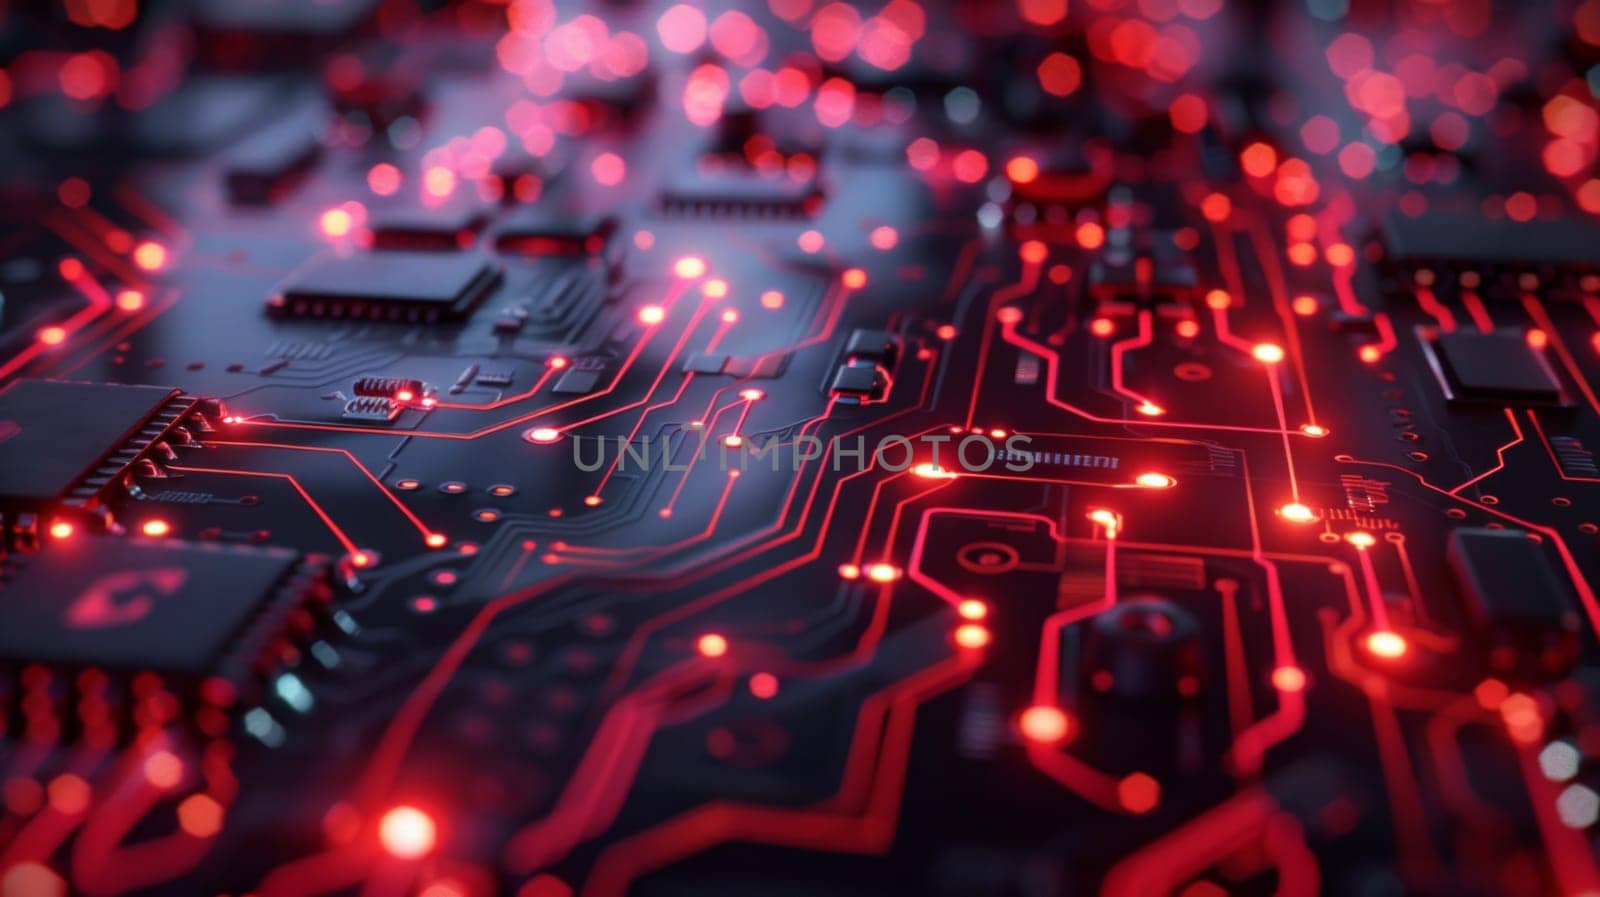 A close up of a circuit board with red lights.